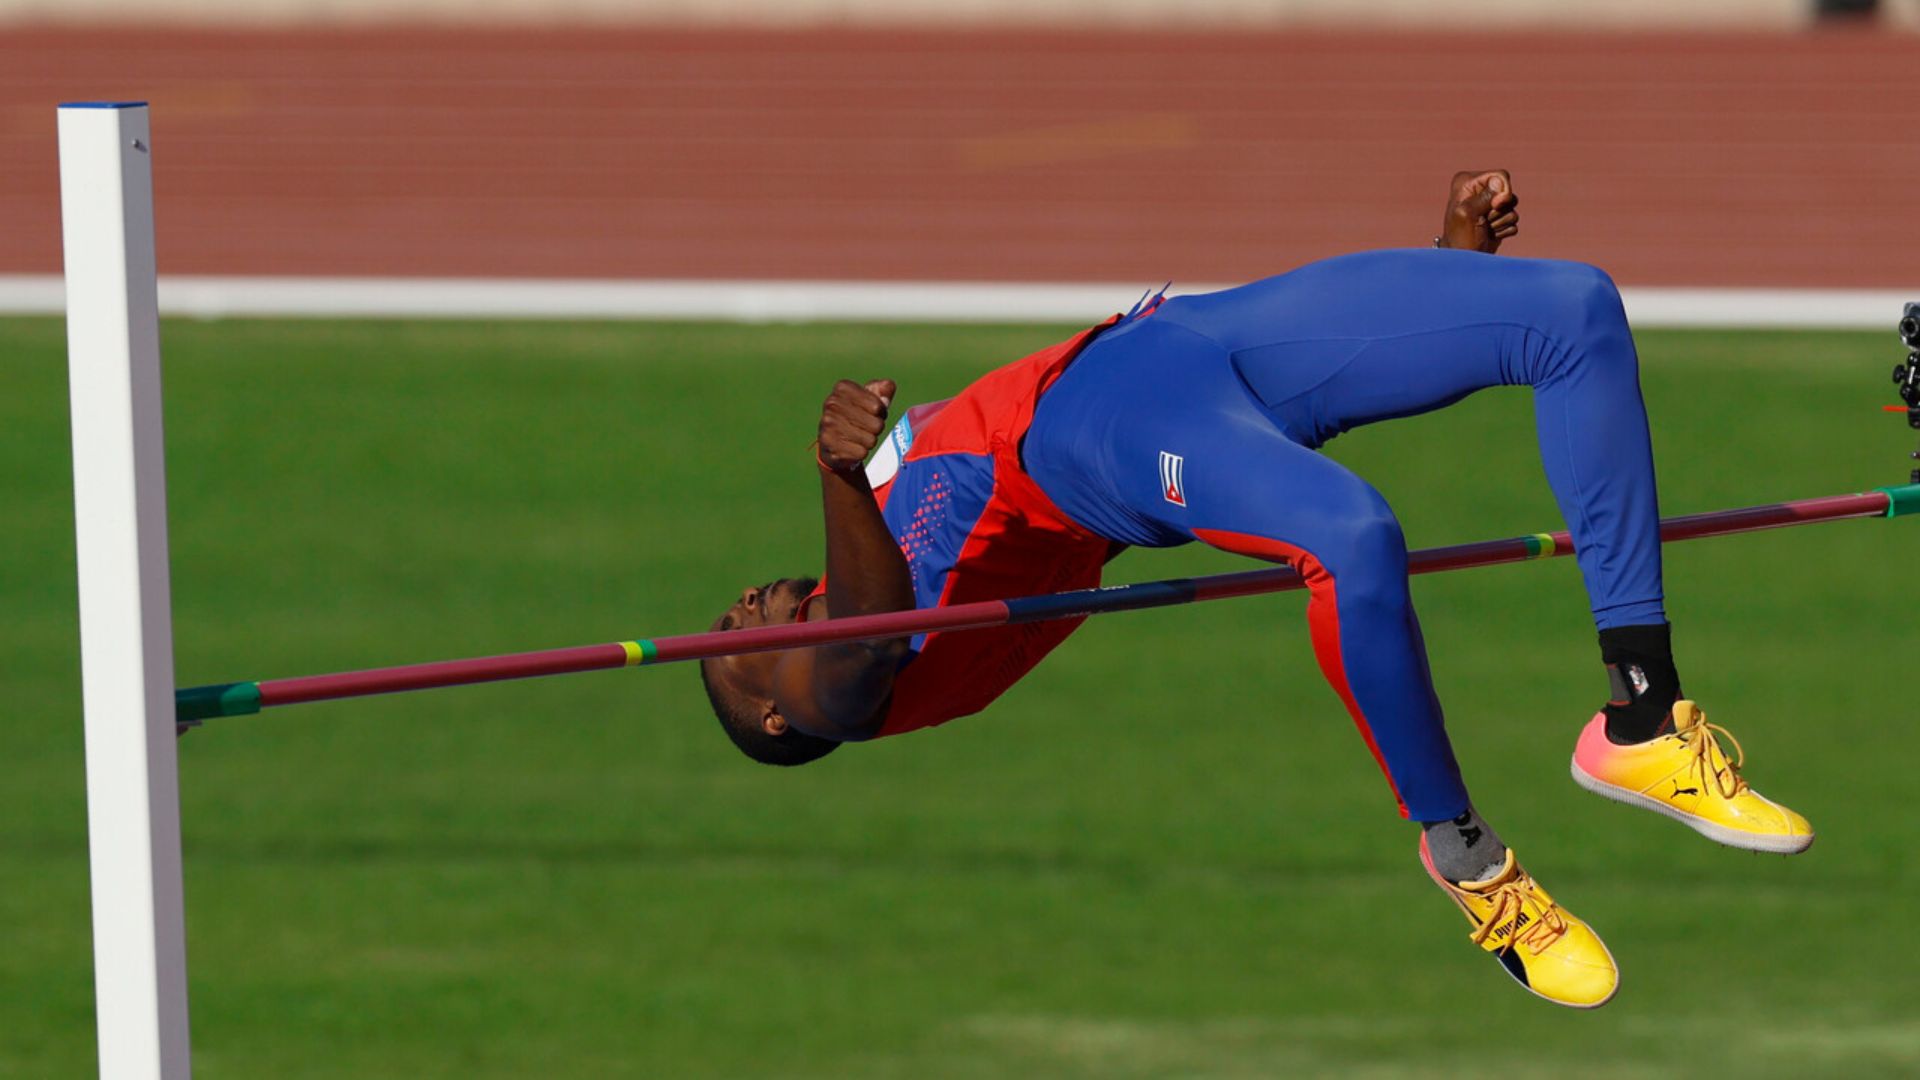 Cuban Zayas Achieves Two-Time Champion Title in High Jump